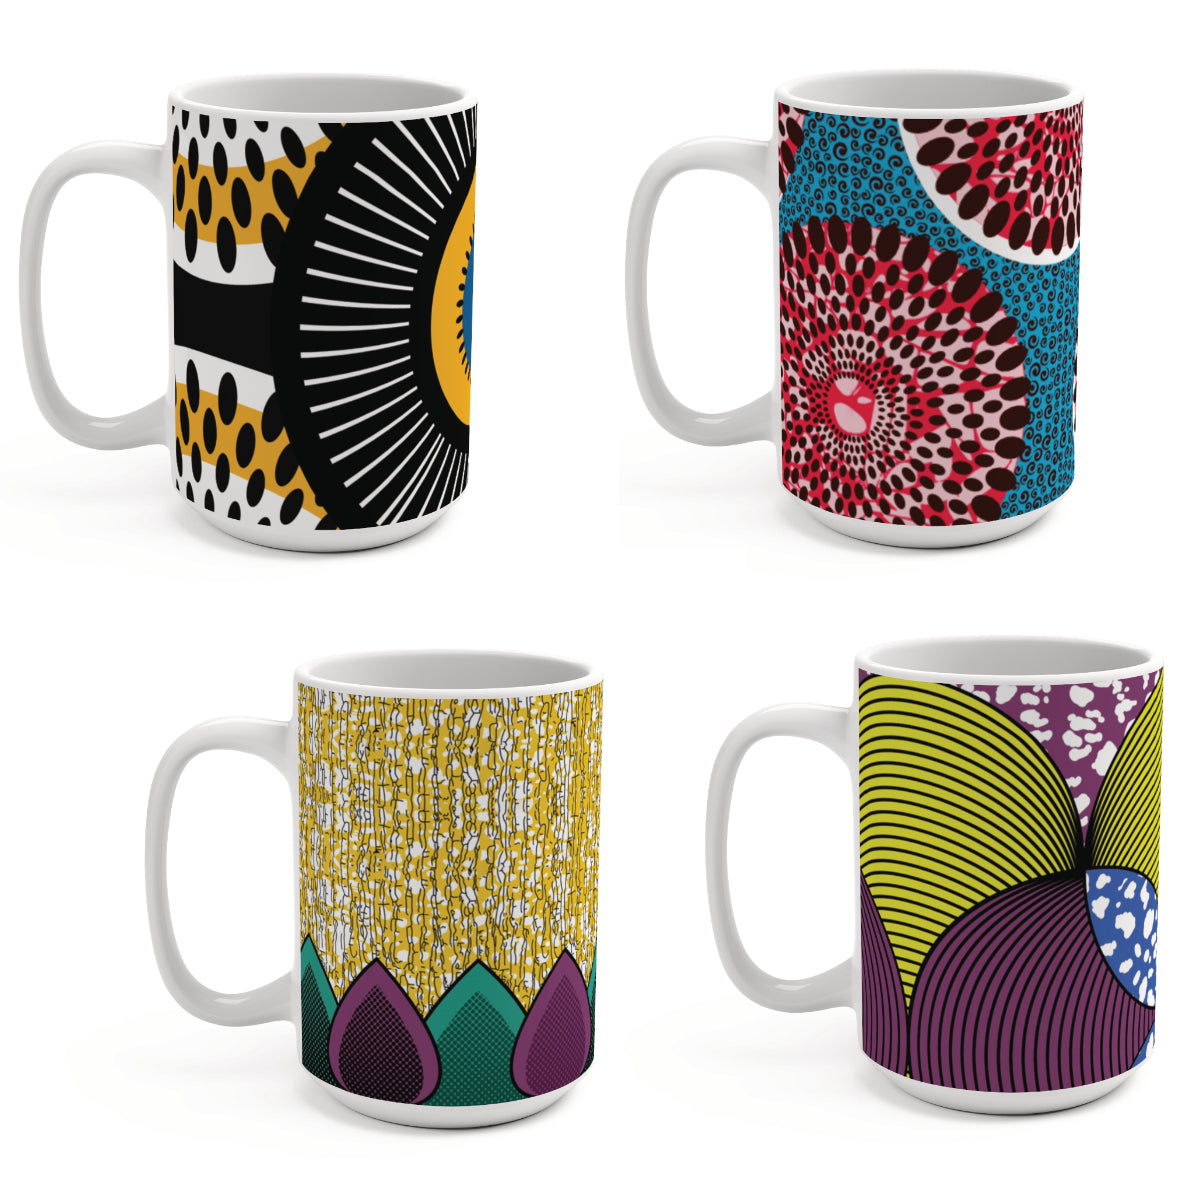 Large 15oz African Print Coffee Mugs (Set of 4) | African Wax Print Fabric Inspired